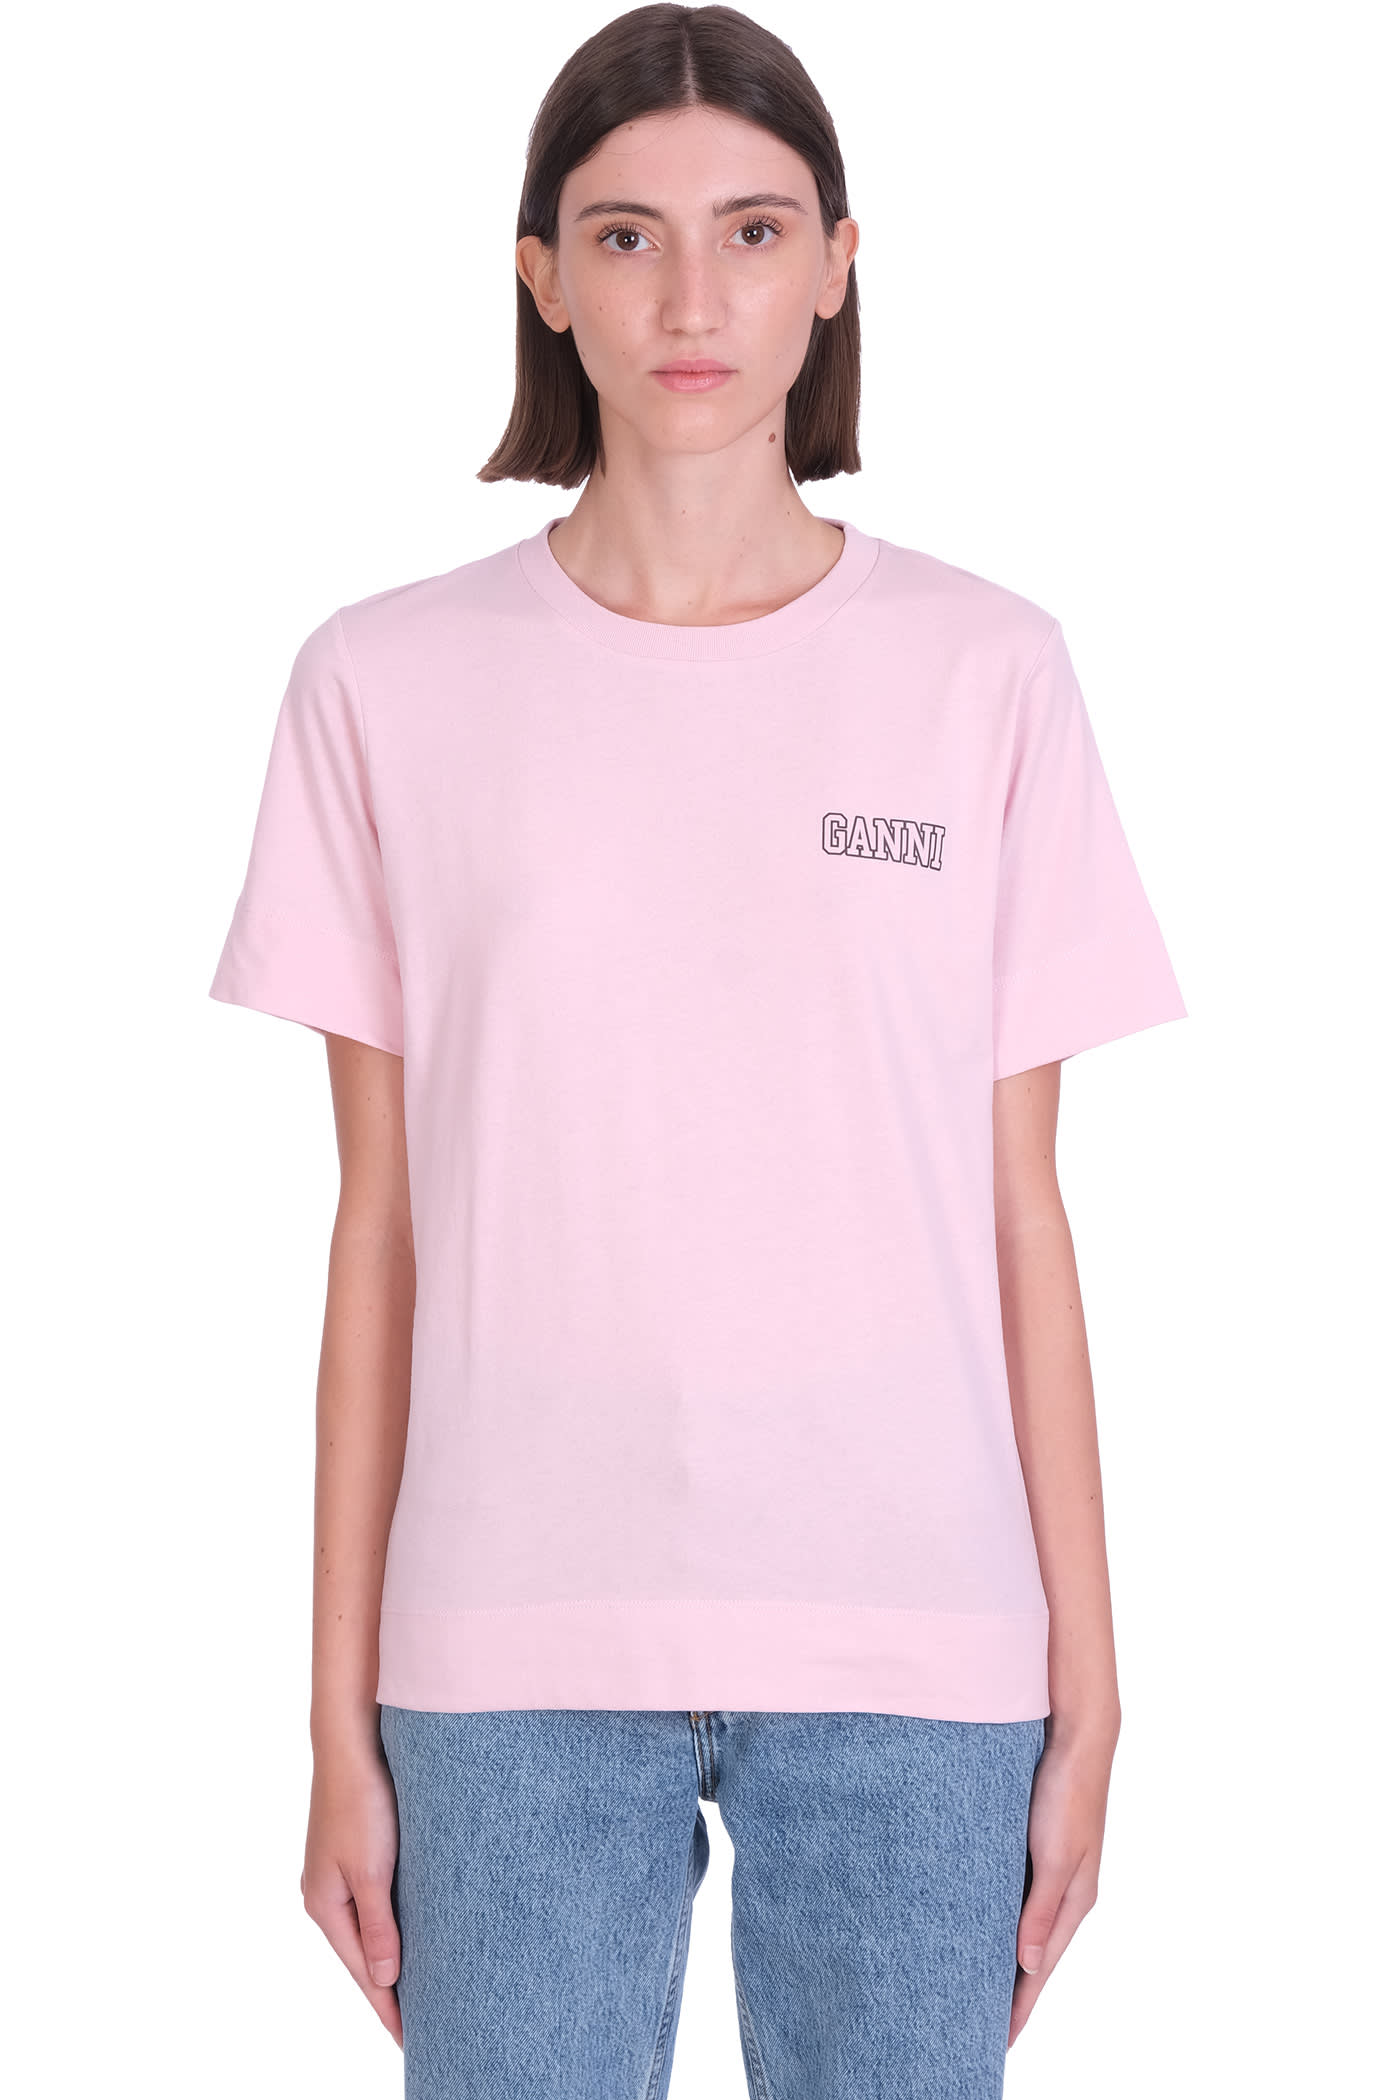 Ganni Thin Software T-shirt In Rose-pink Cotton